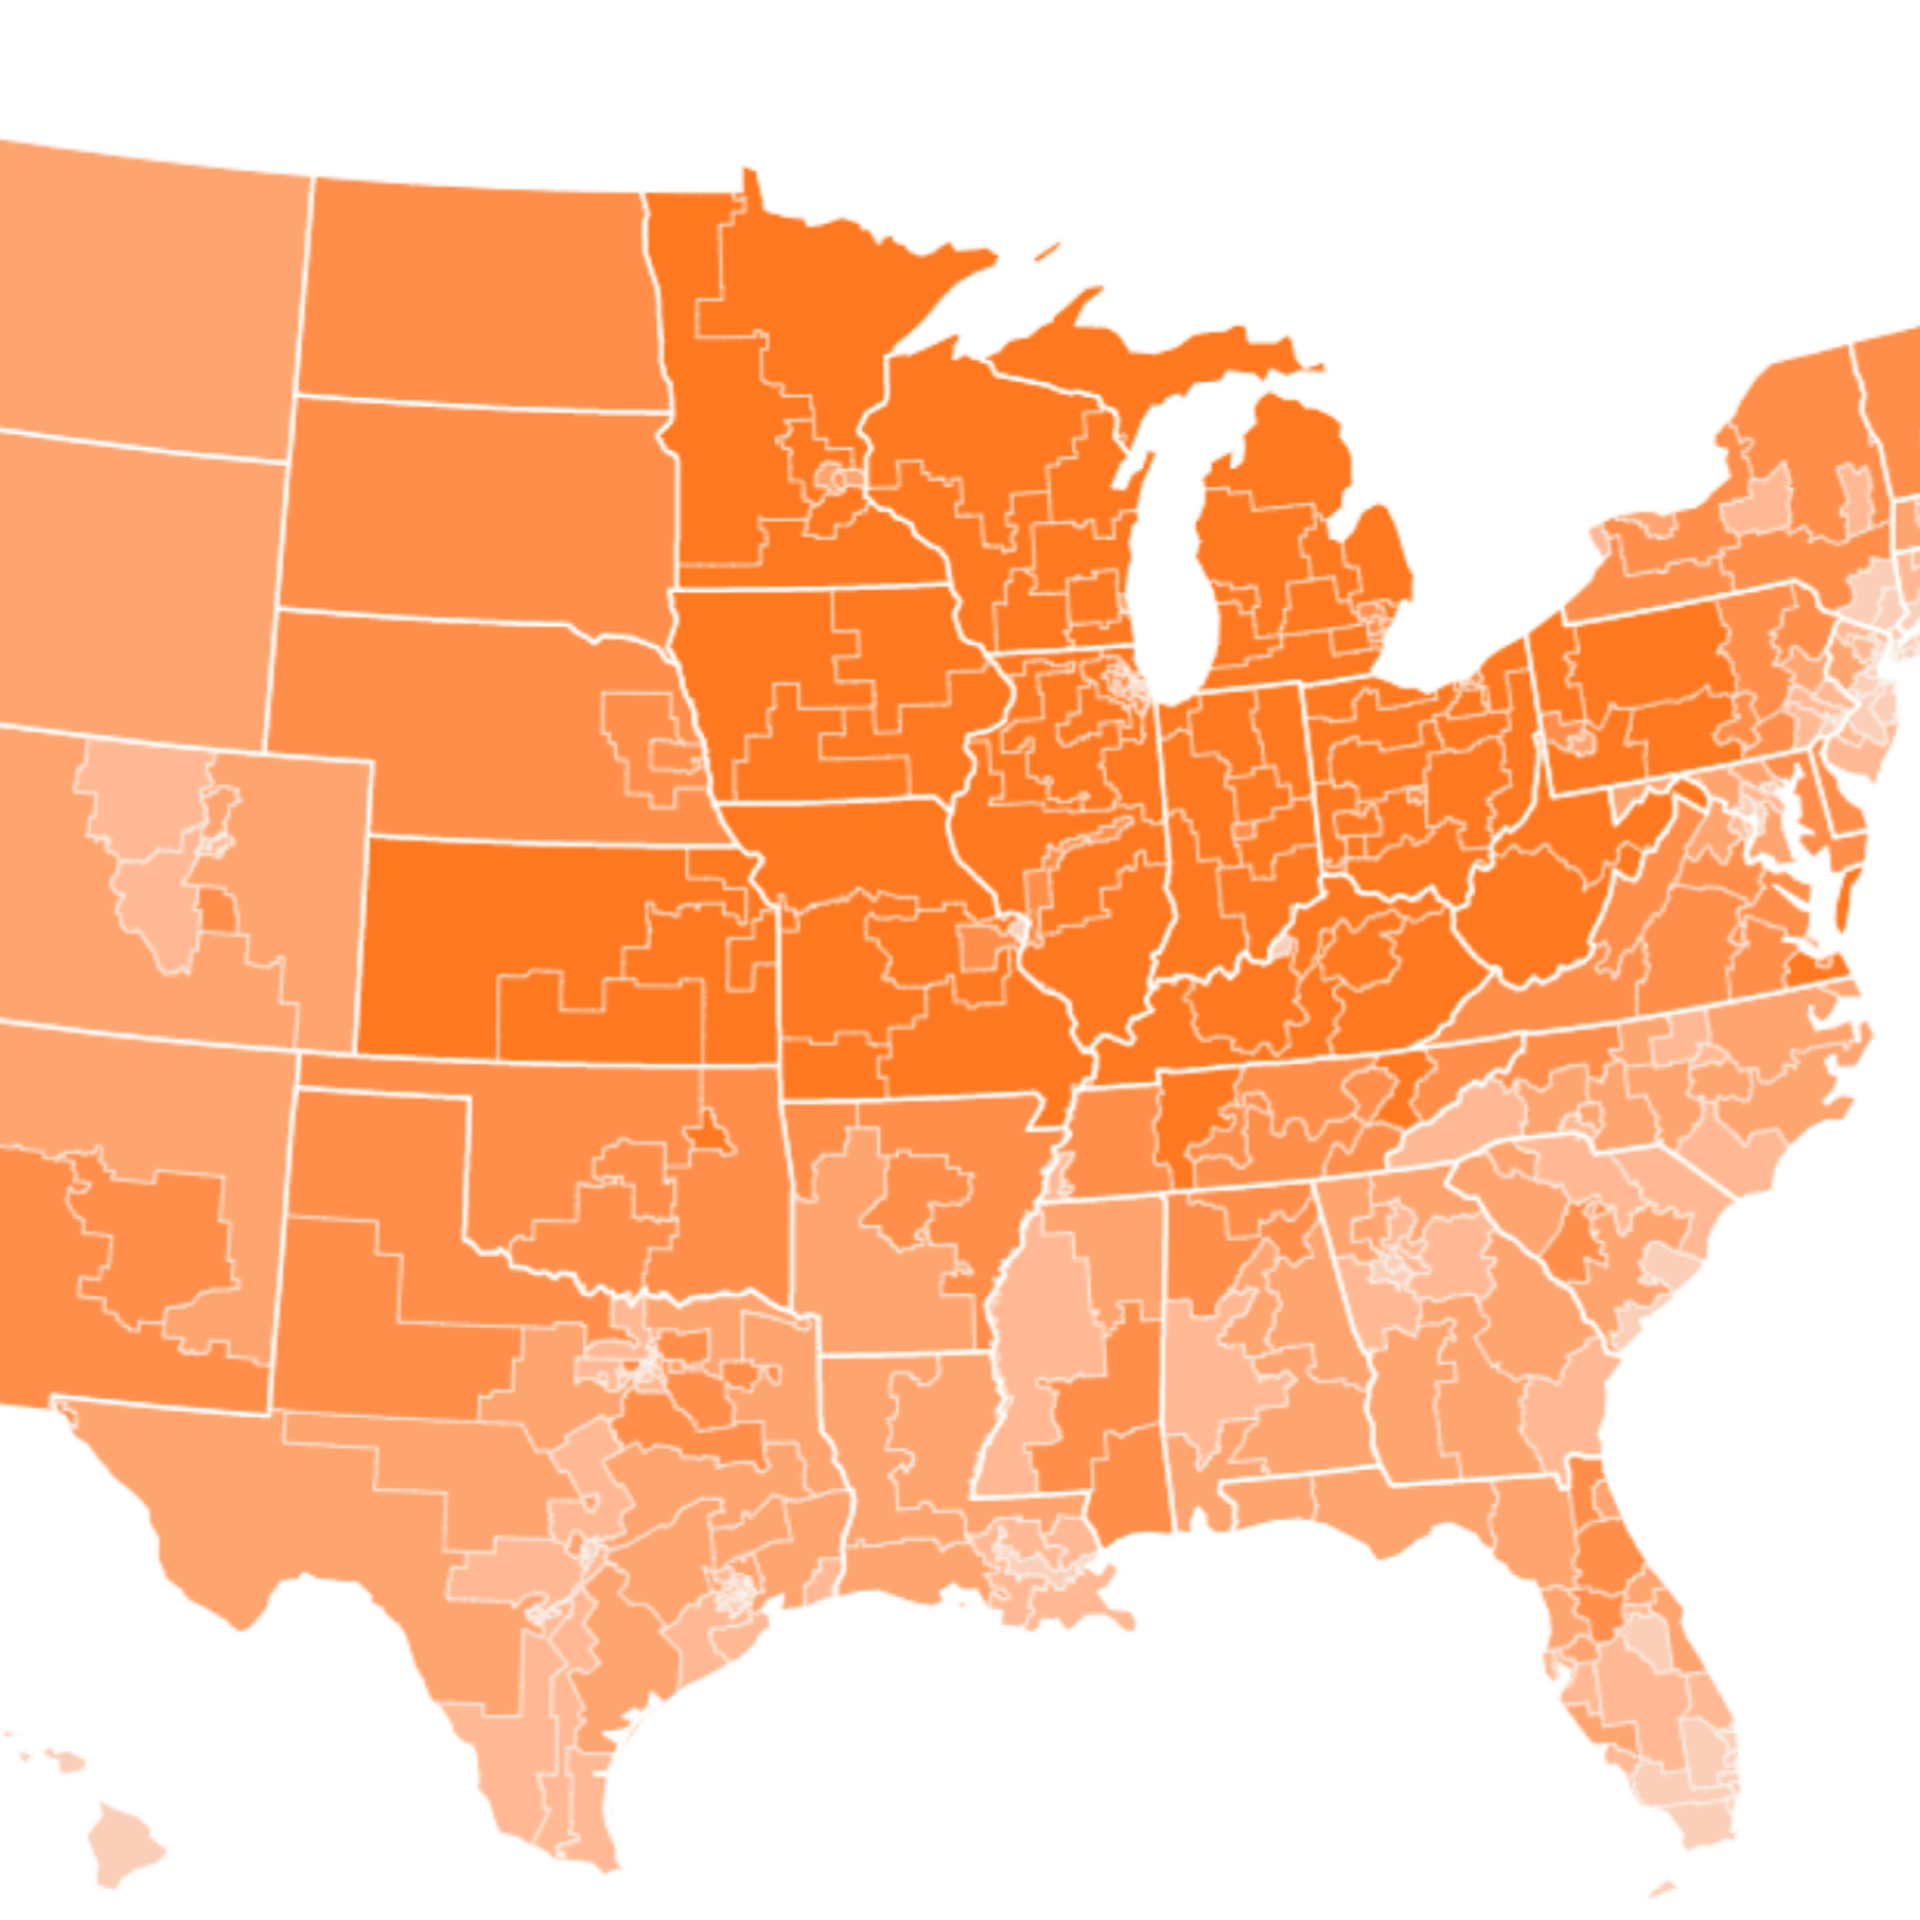 A choropleth map of the U.S. showing search interest in "gas prices."